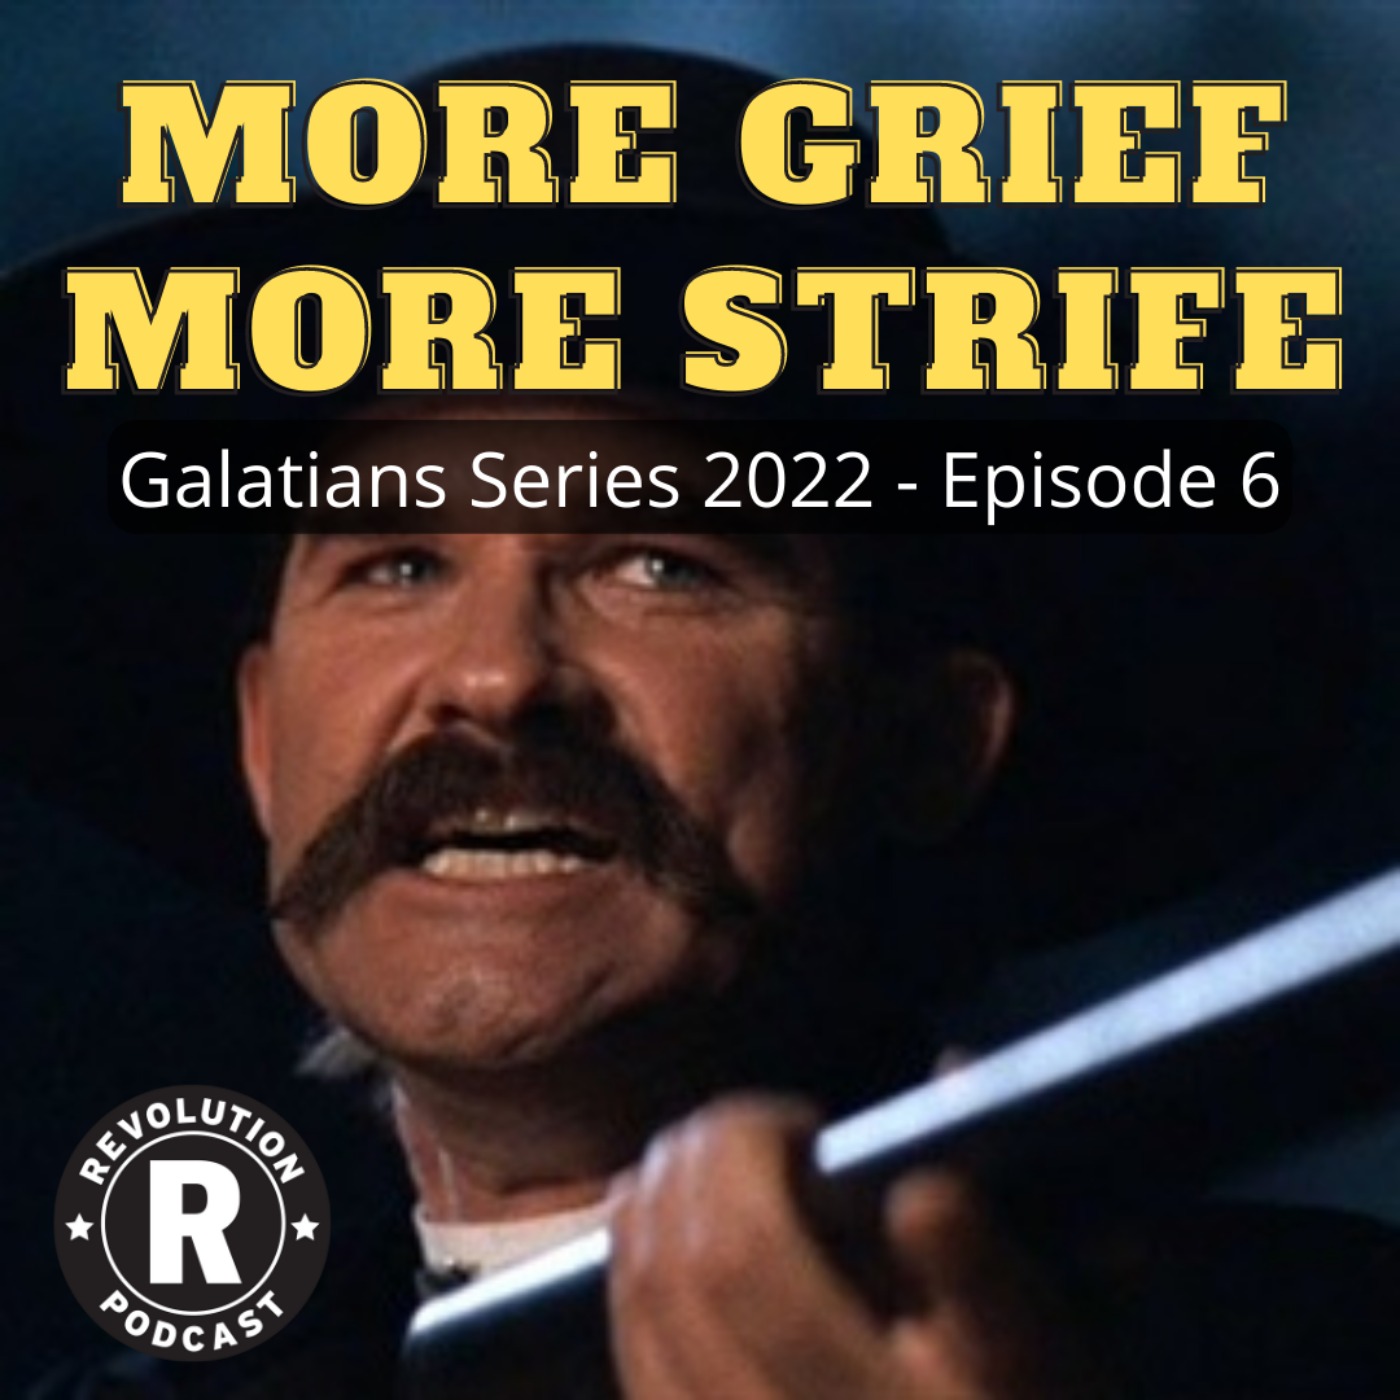 More Grief, More Strife